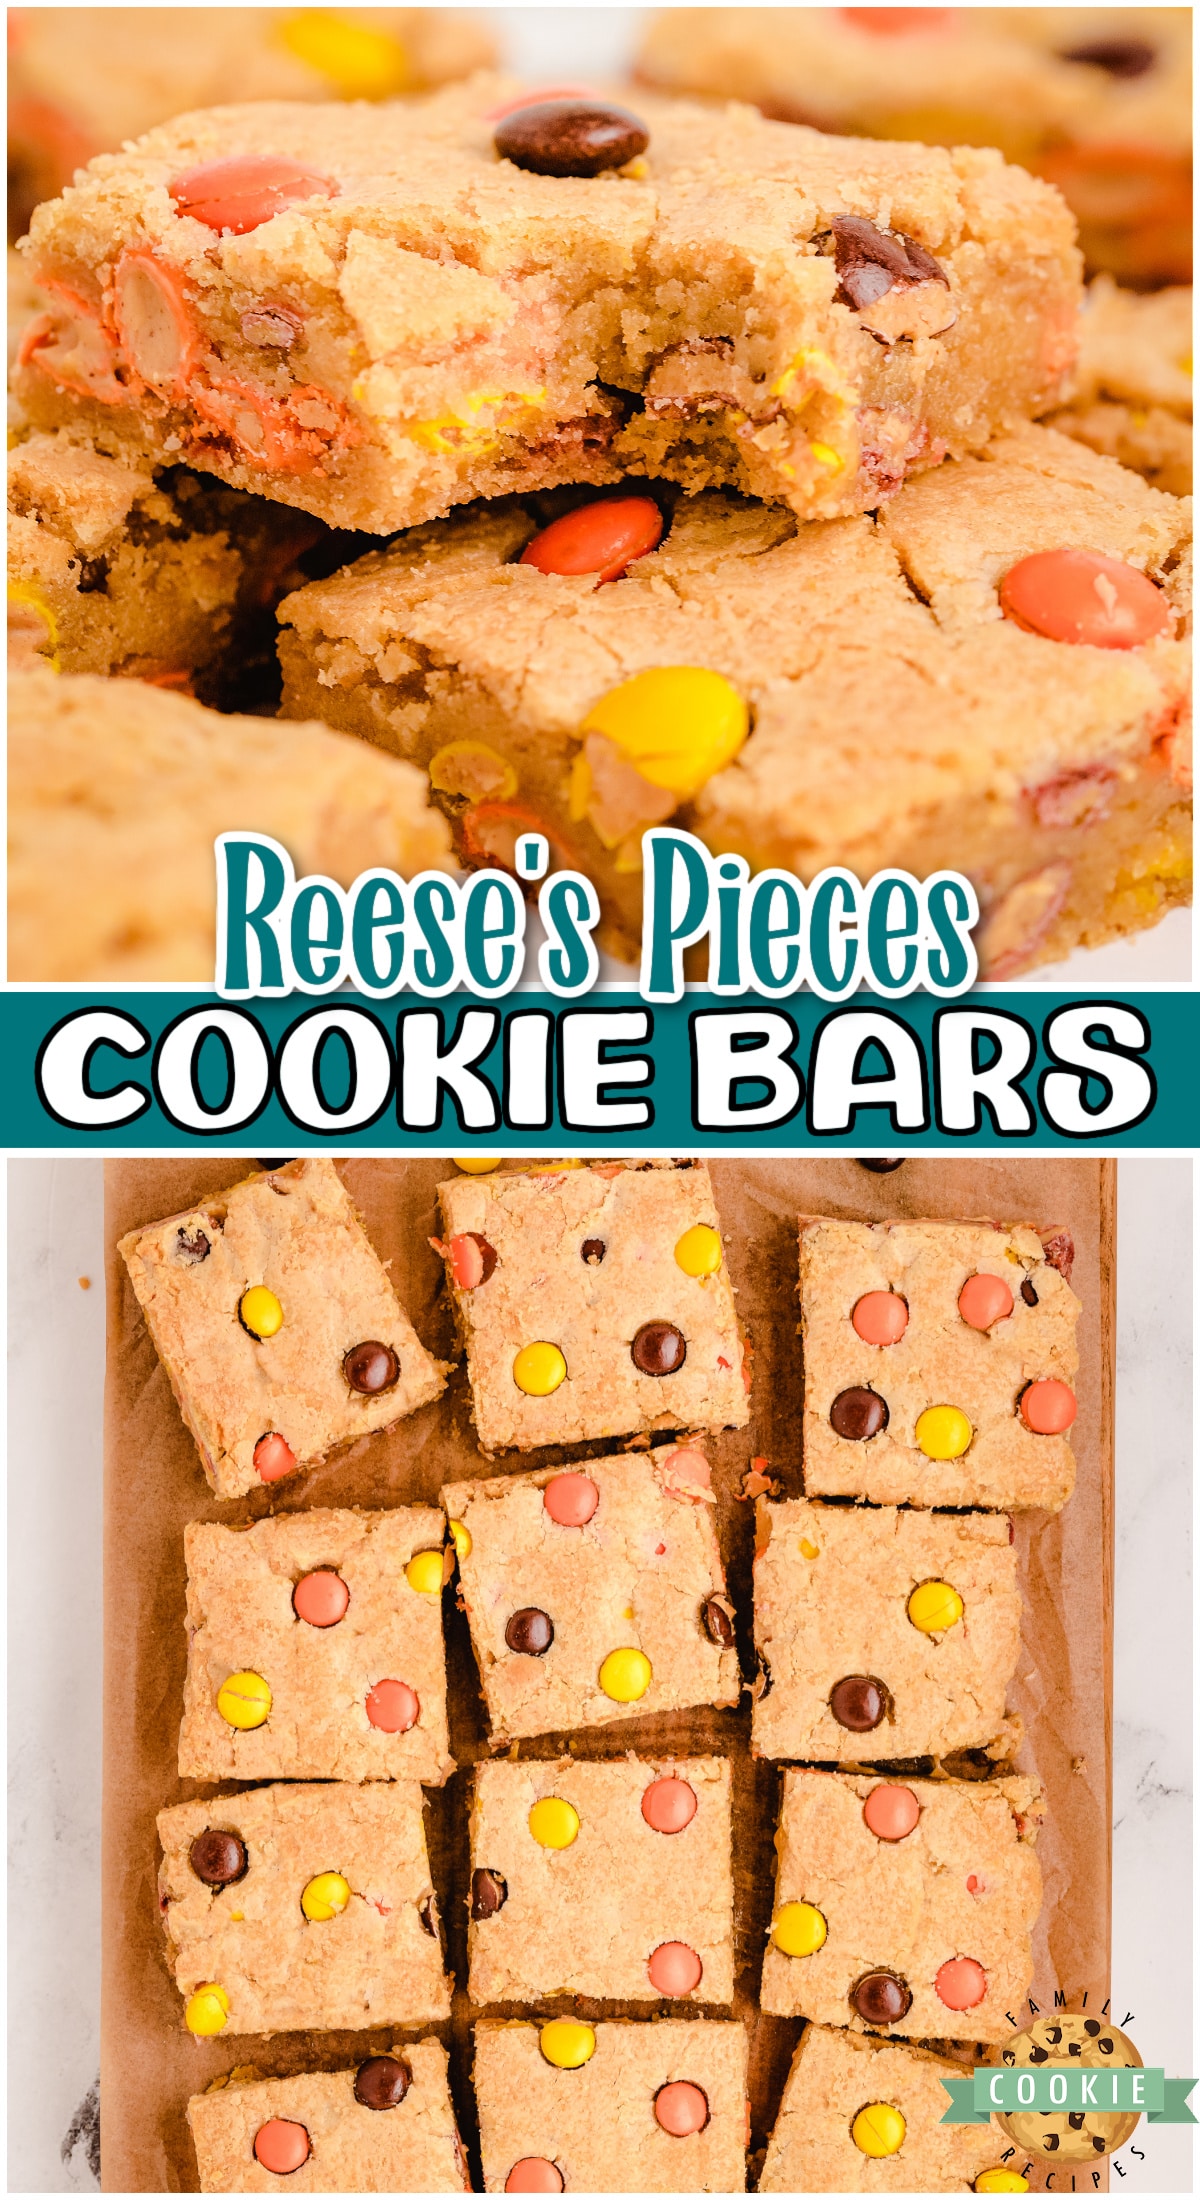 These easy Reese's Cookie Bars are made with Reese's Pieces in a simple cookie dough recipe! Sweet and delightful cookie bars loaded with Reese's candies.